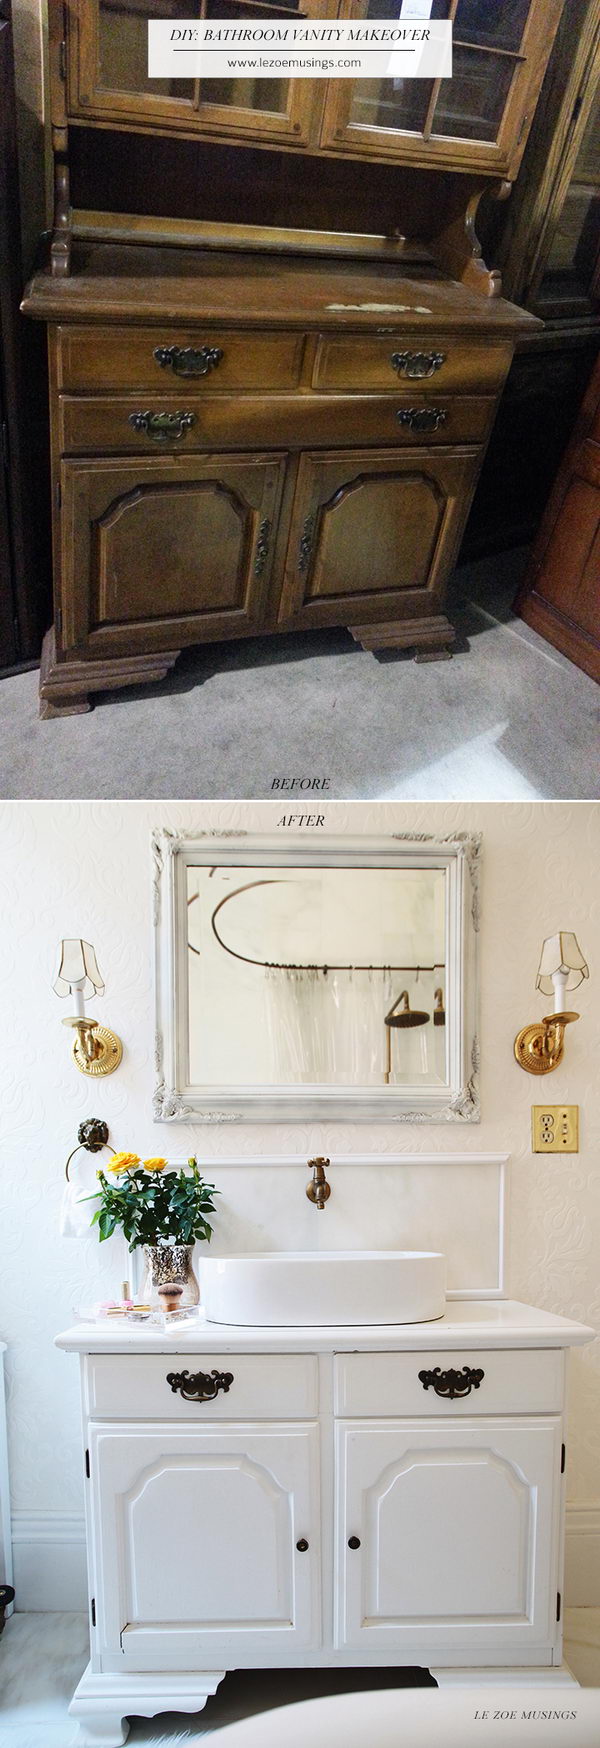 DIY Bathroom Vanity Makeover from a $40 Thrift Store Hutch. 